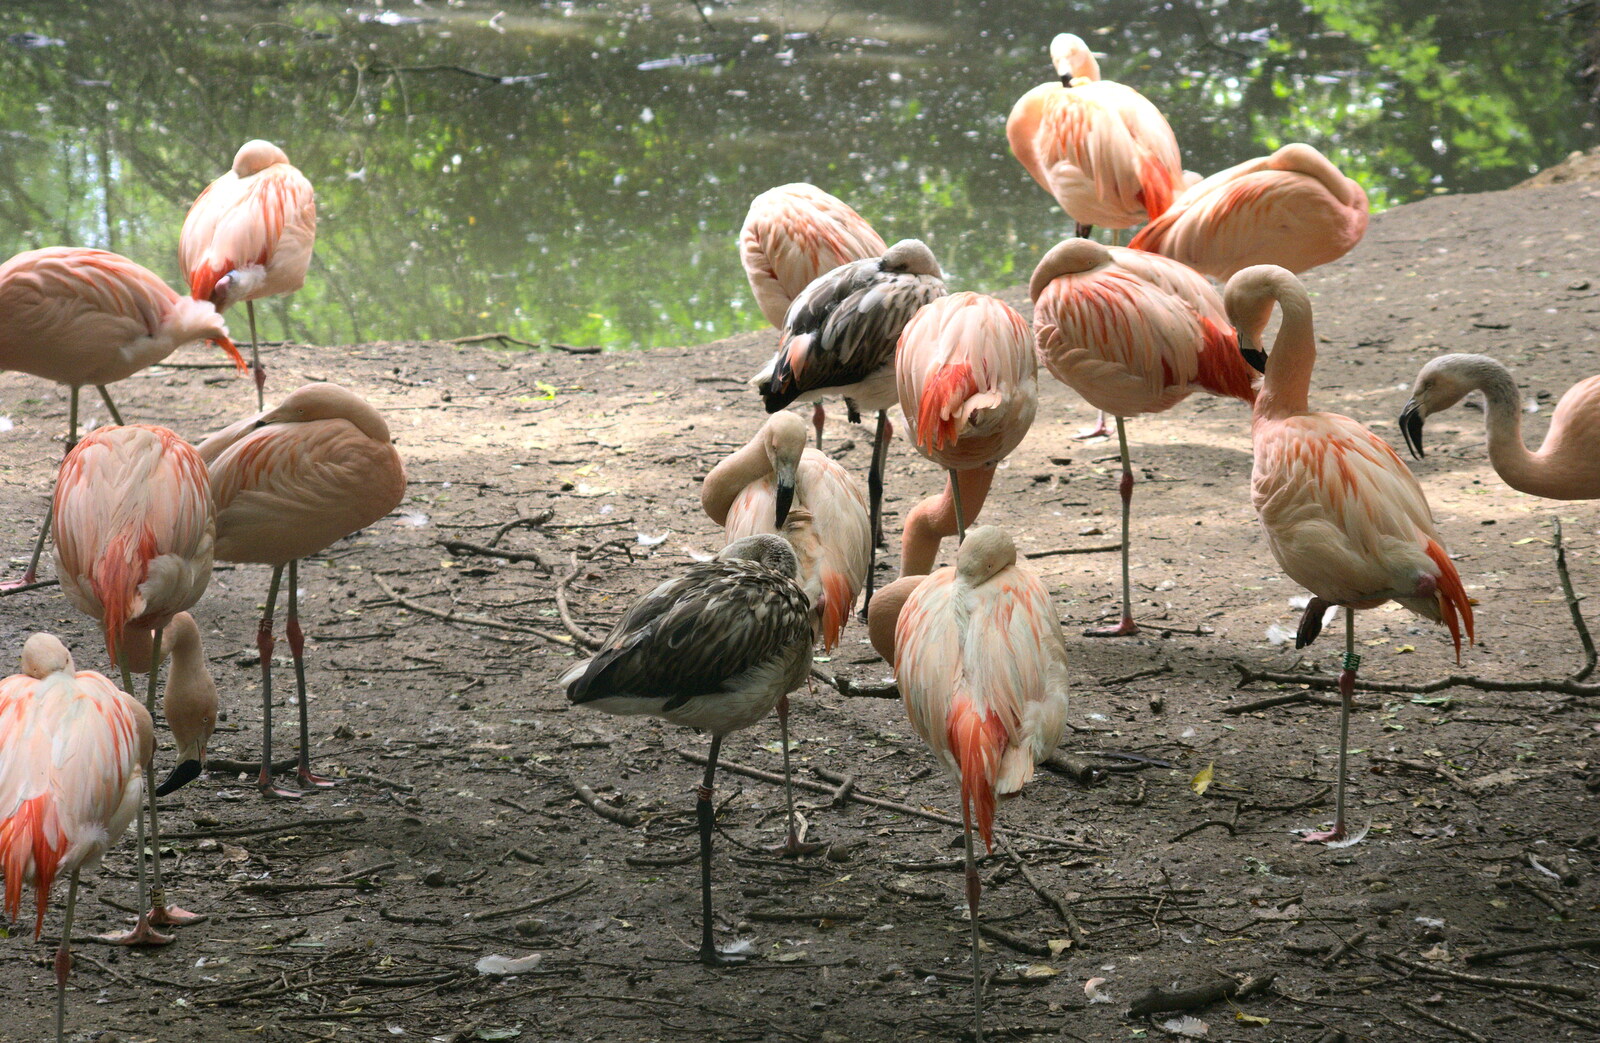 A Birthday Trip to the Zoo, Banham, Norfolk - 26th May 2014: A flock of flamingos